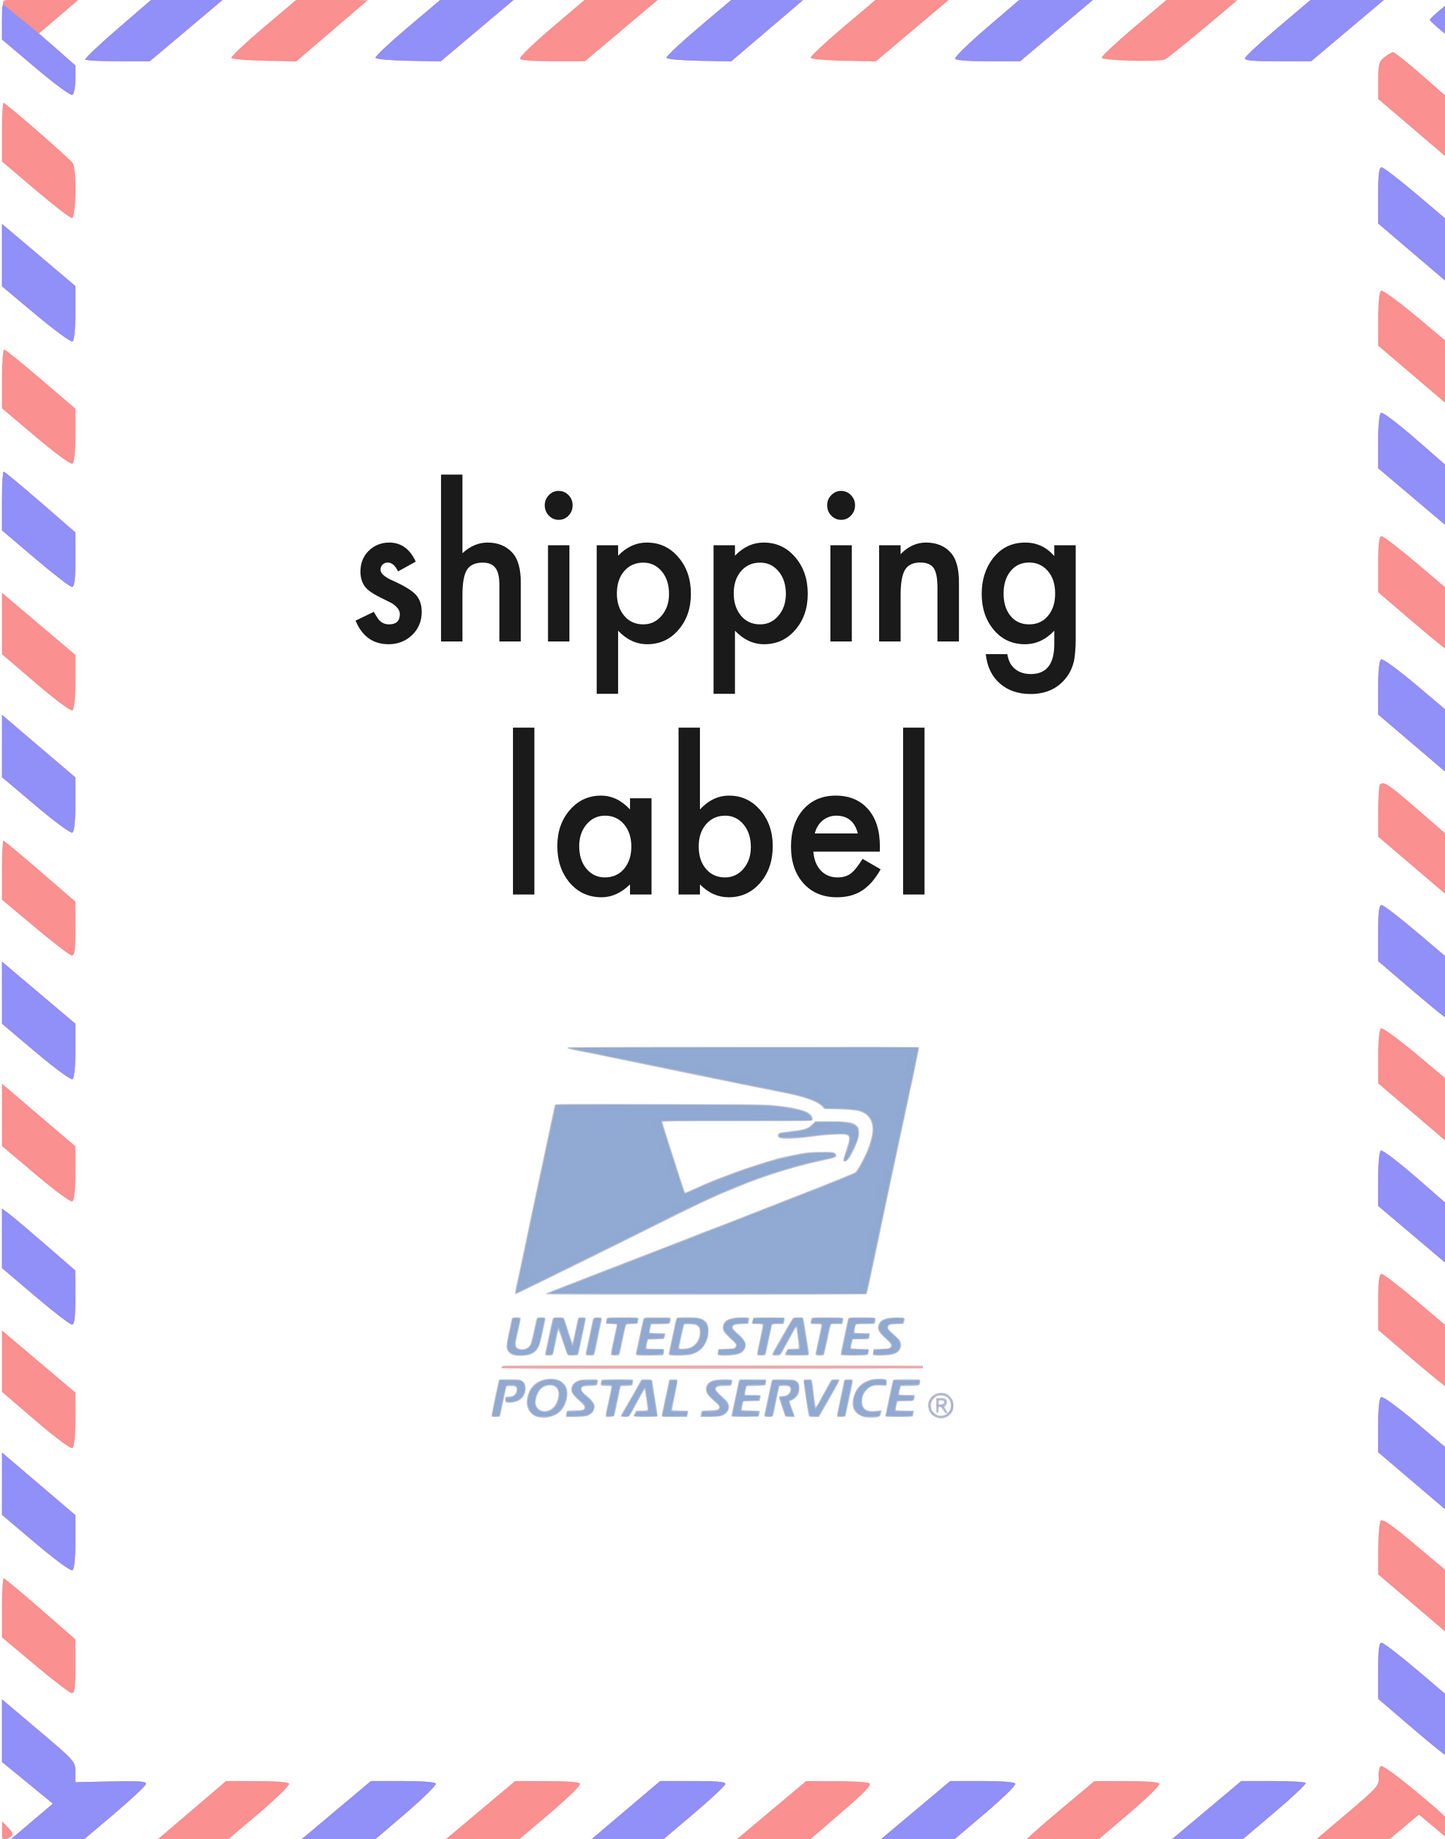 Shipping Label for new item